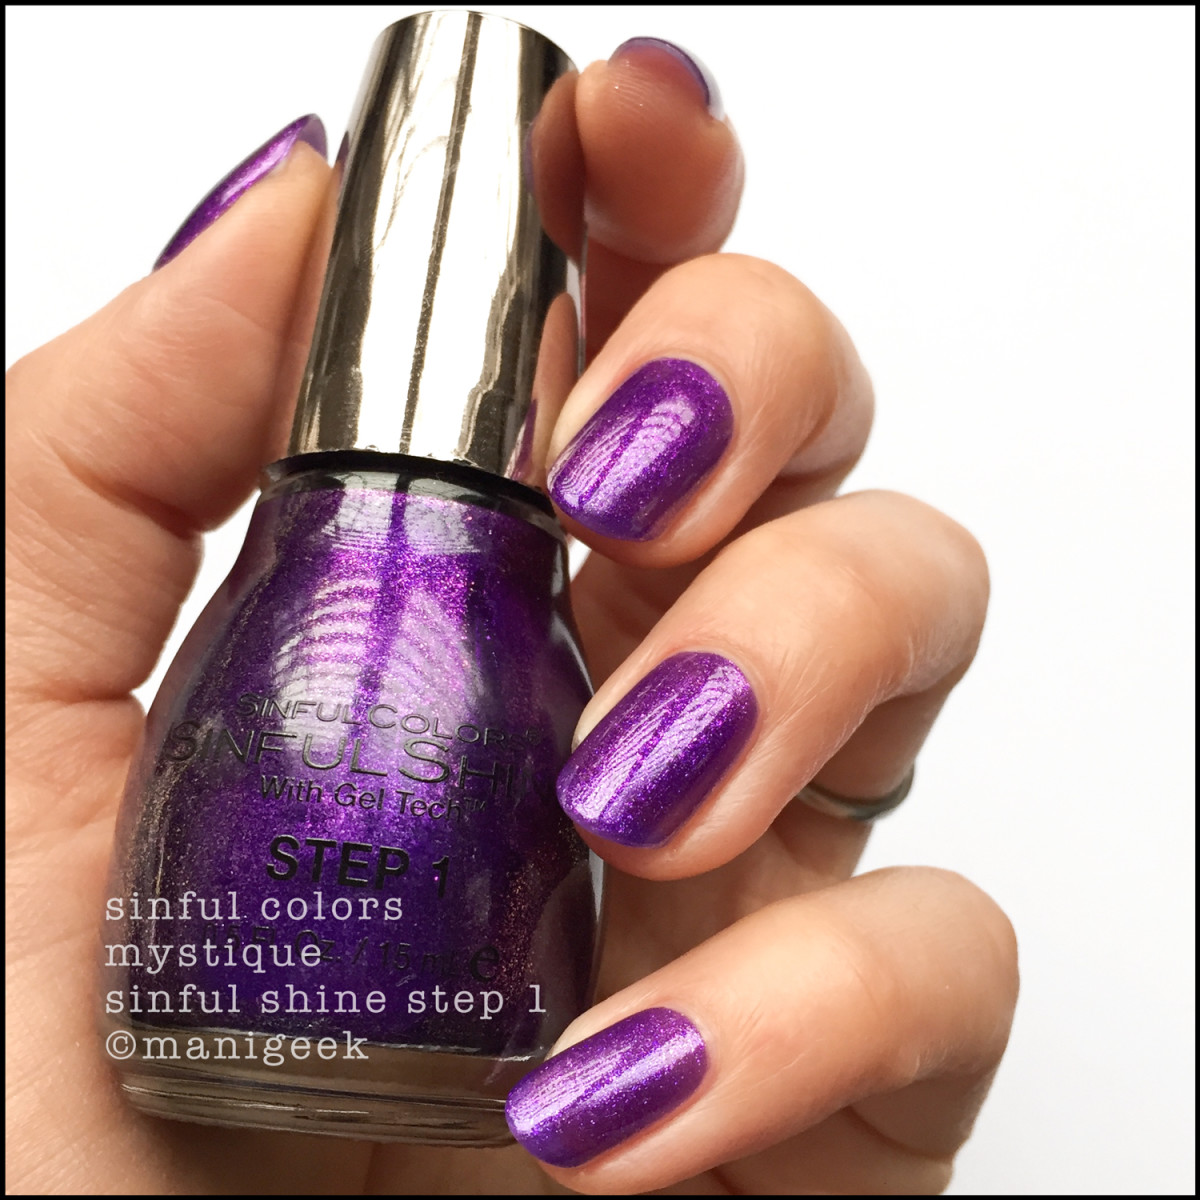 Sinful Colors Mystique Sinful Shine _ Sinful Colors Swatches